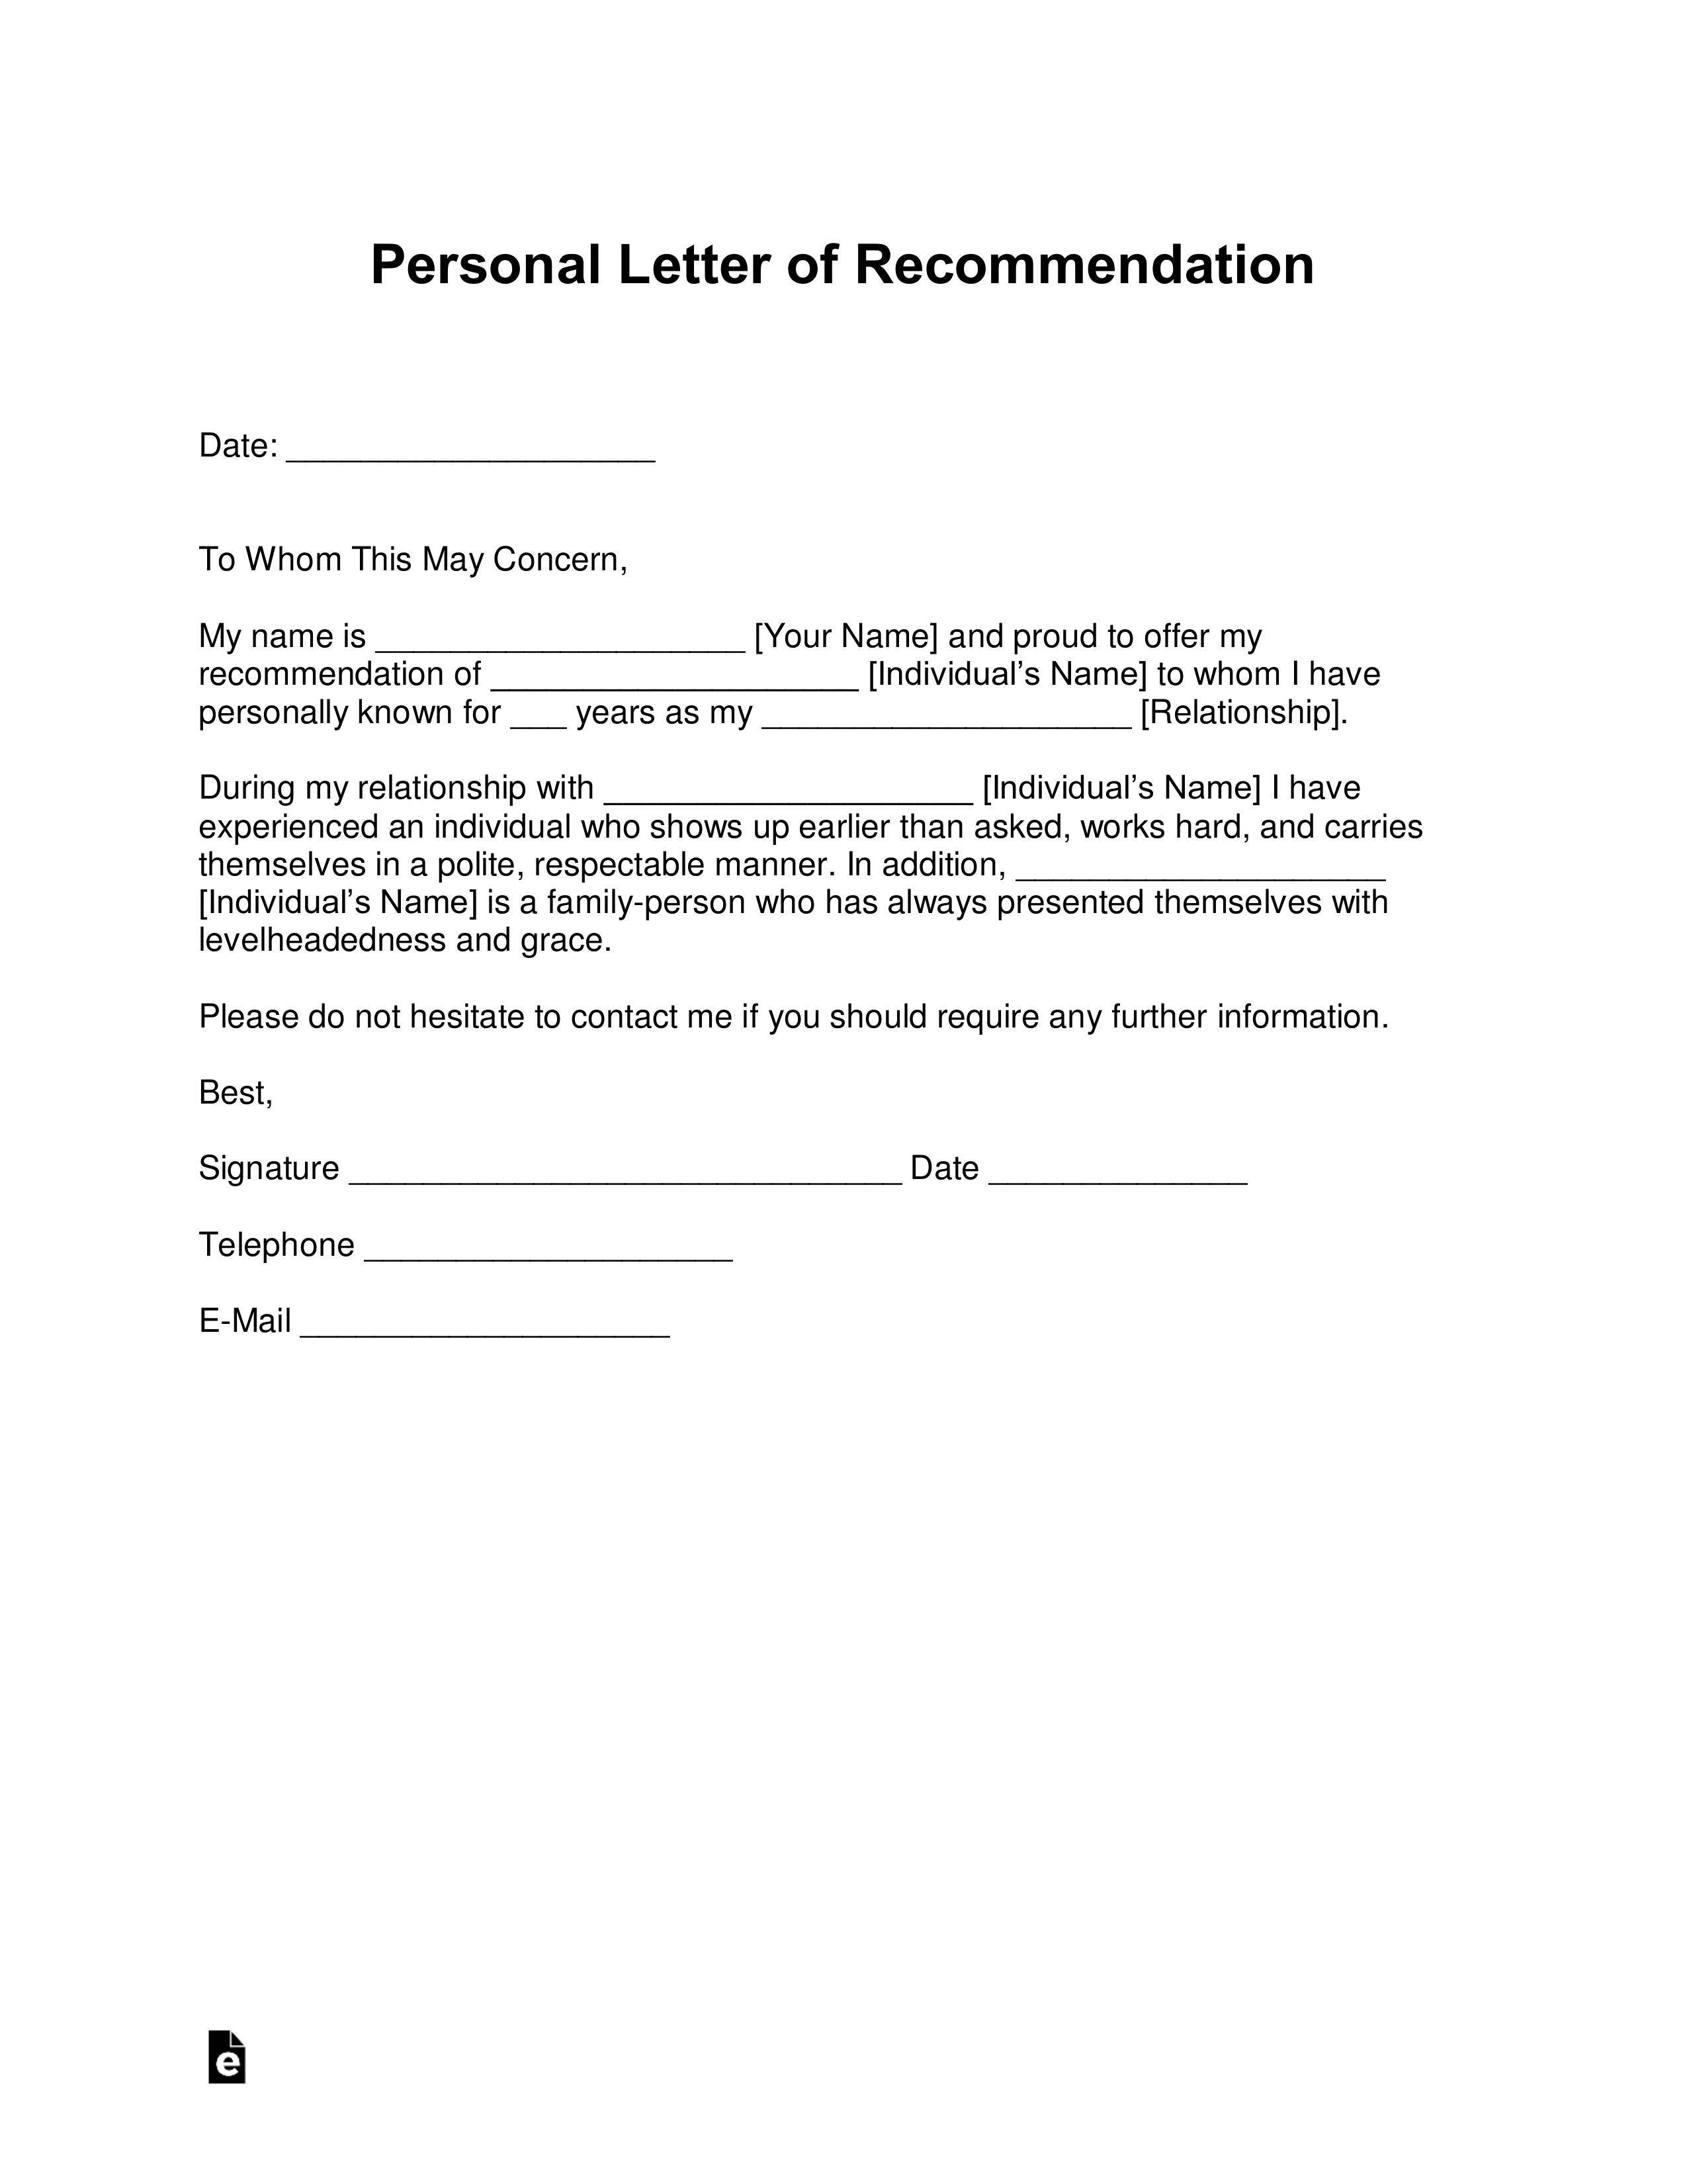 Letter Of Recommendation Professional from eforms.com